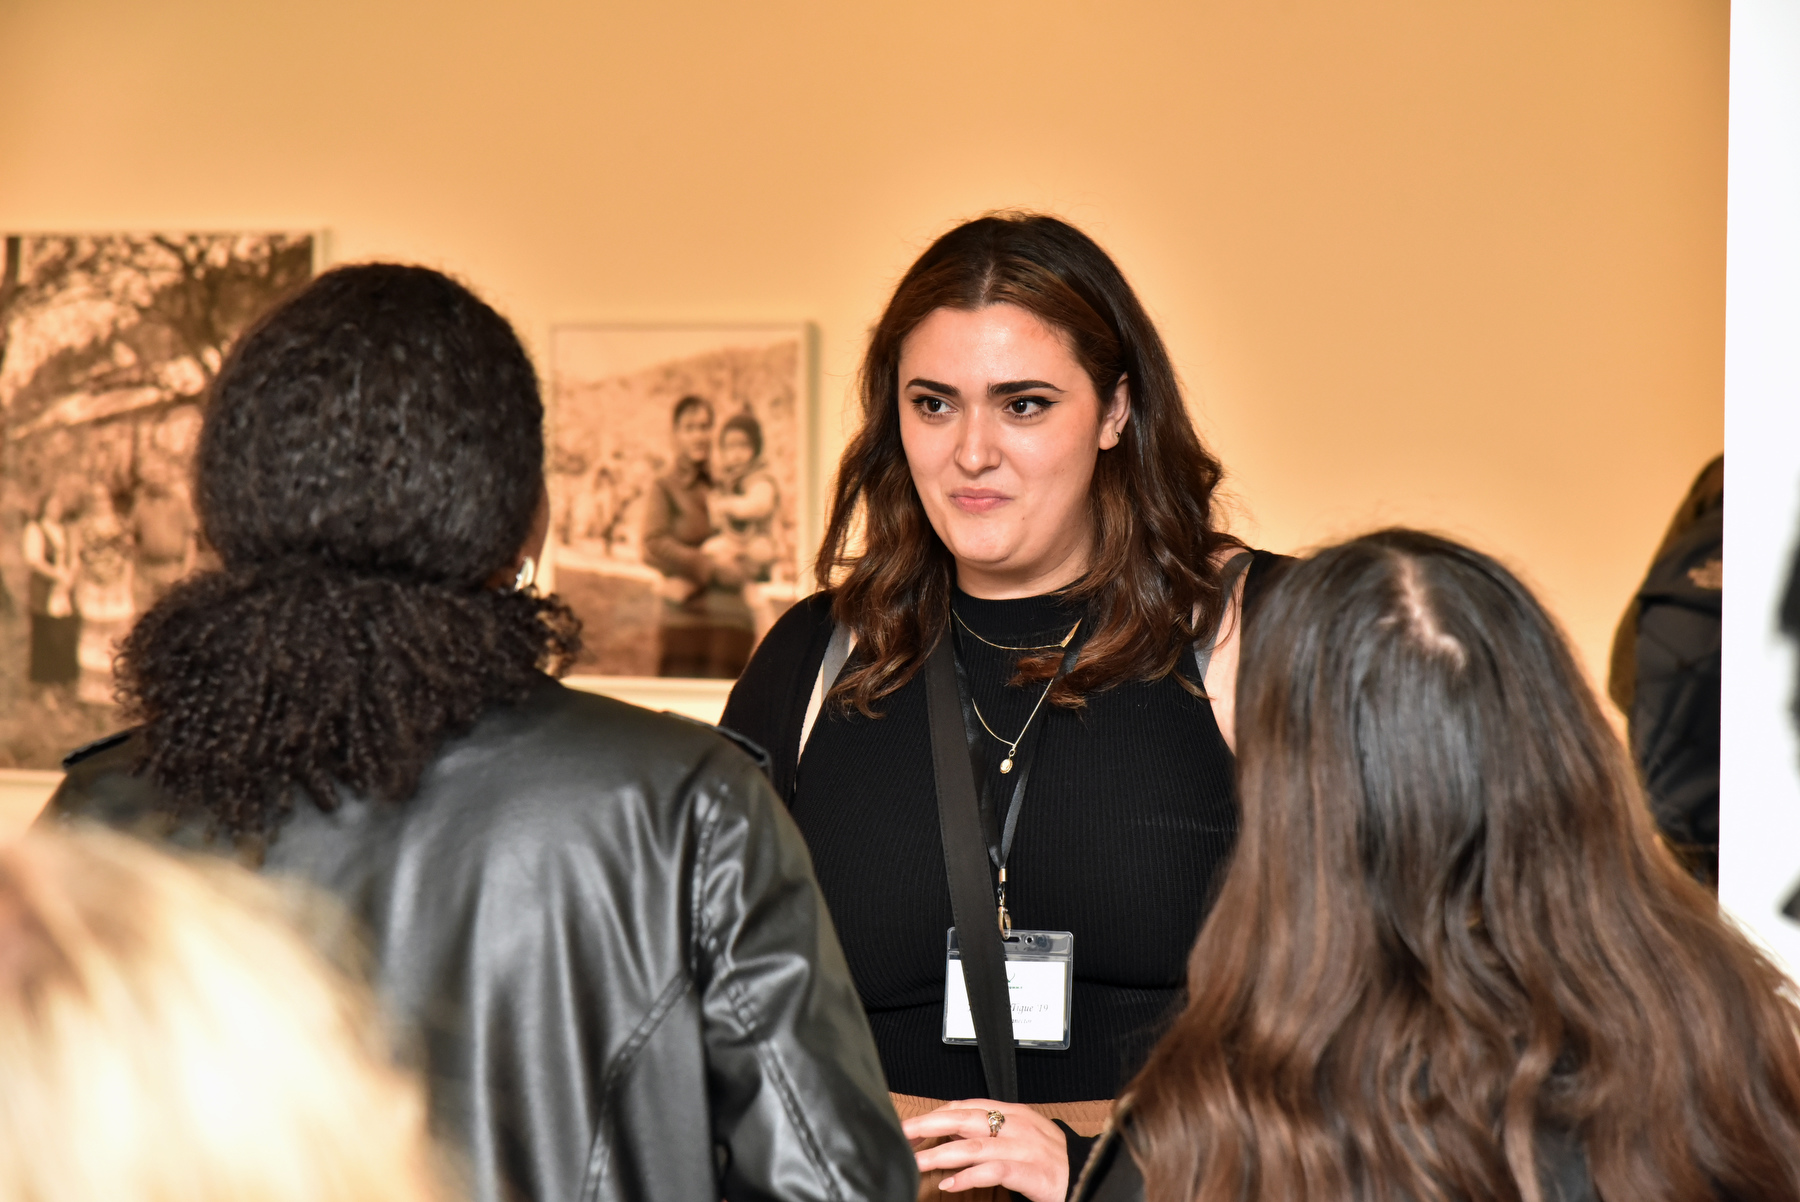 Networking opportunities for current students with Oswego alumni professionals were scheduled following the Media Summit's panel discussion. "Career Connector" Jackie McTigue '19, production coordinator with the International Alliance of Theatrical Stage Employees, talks with a group of students.